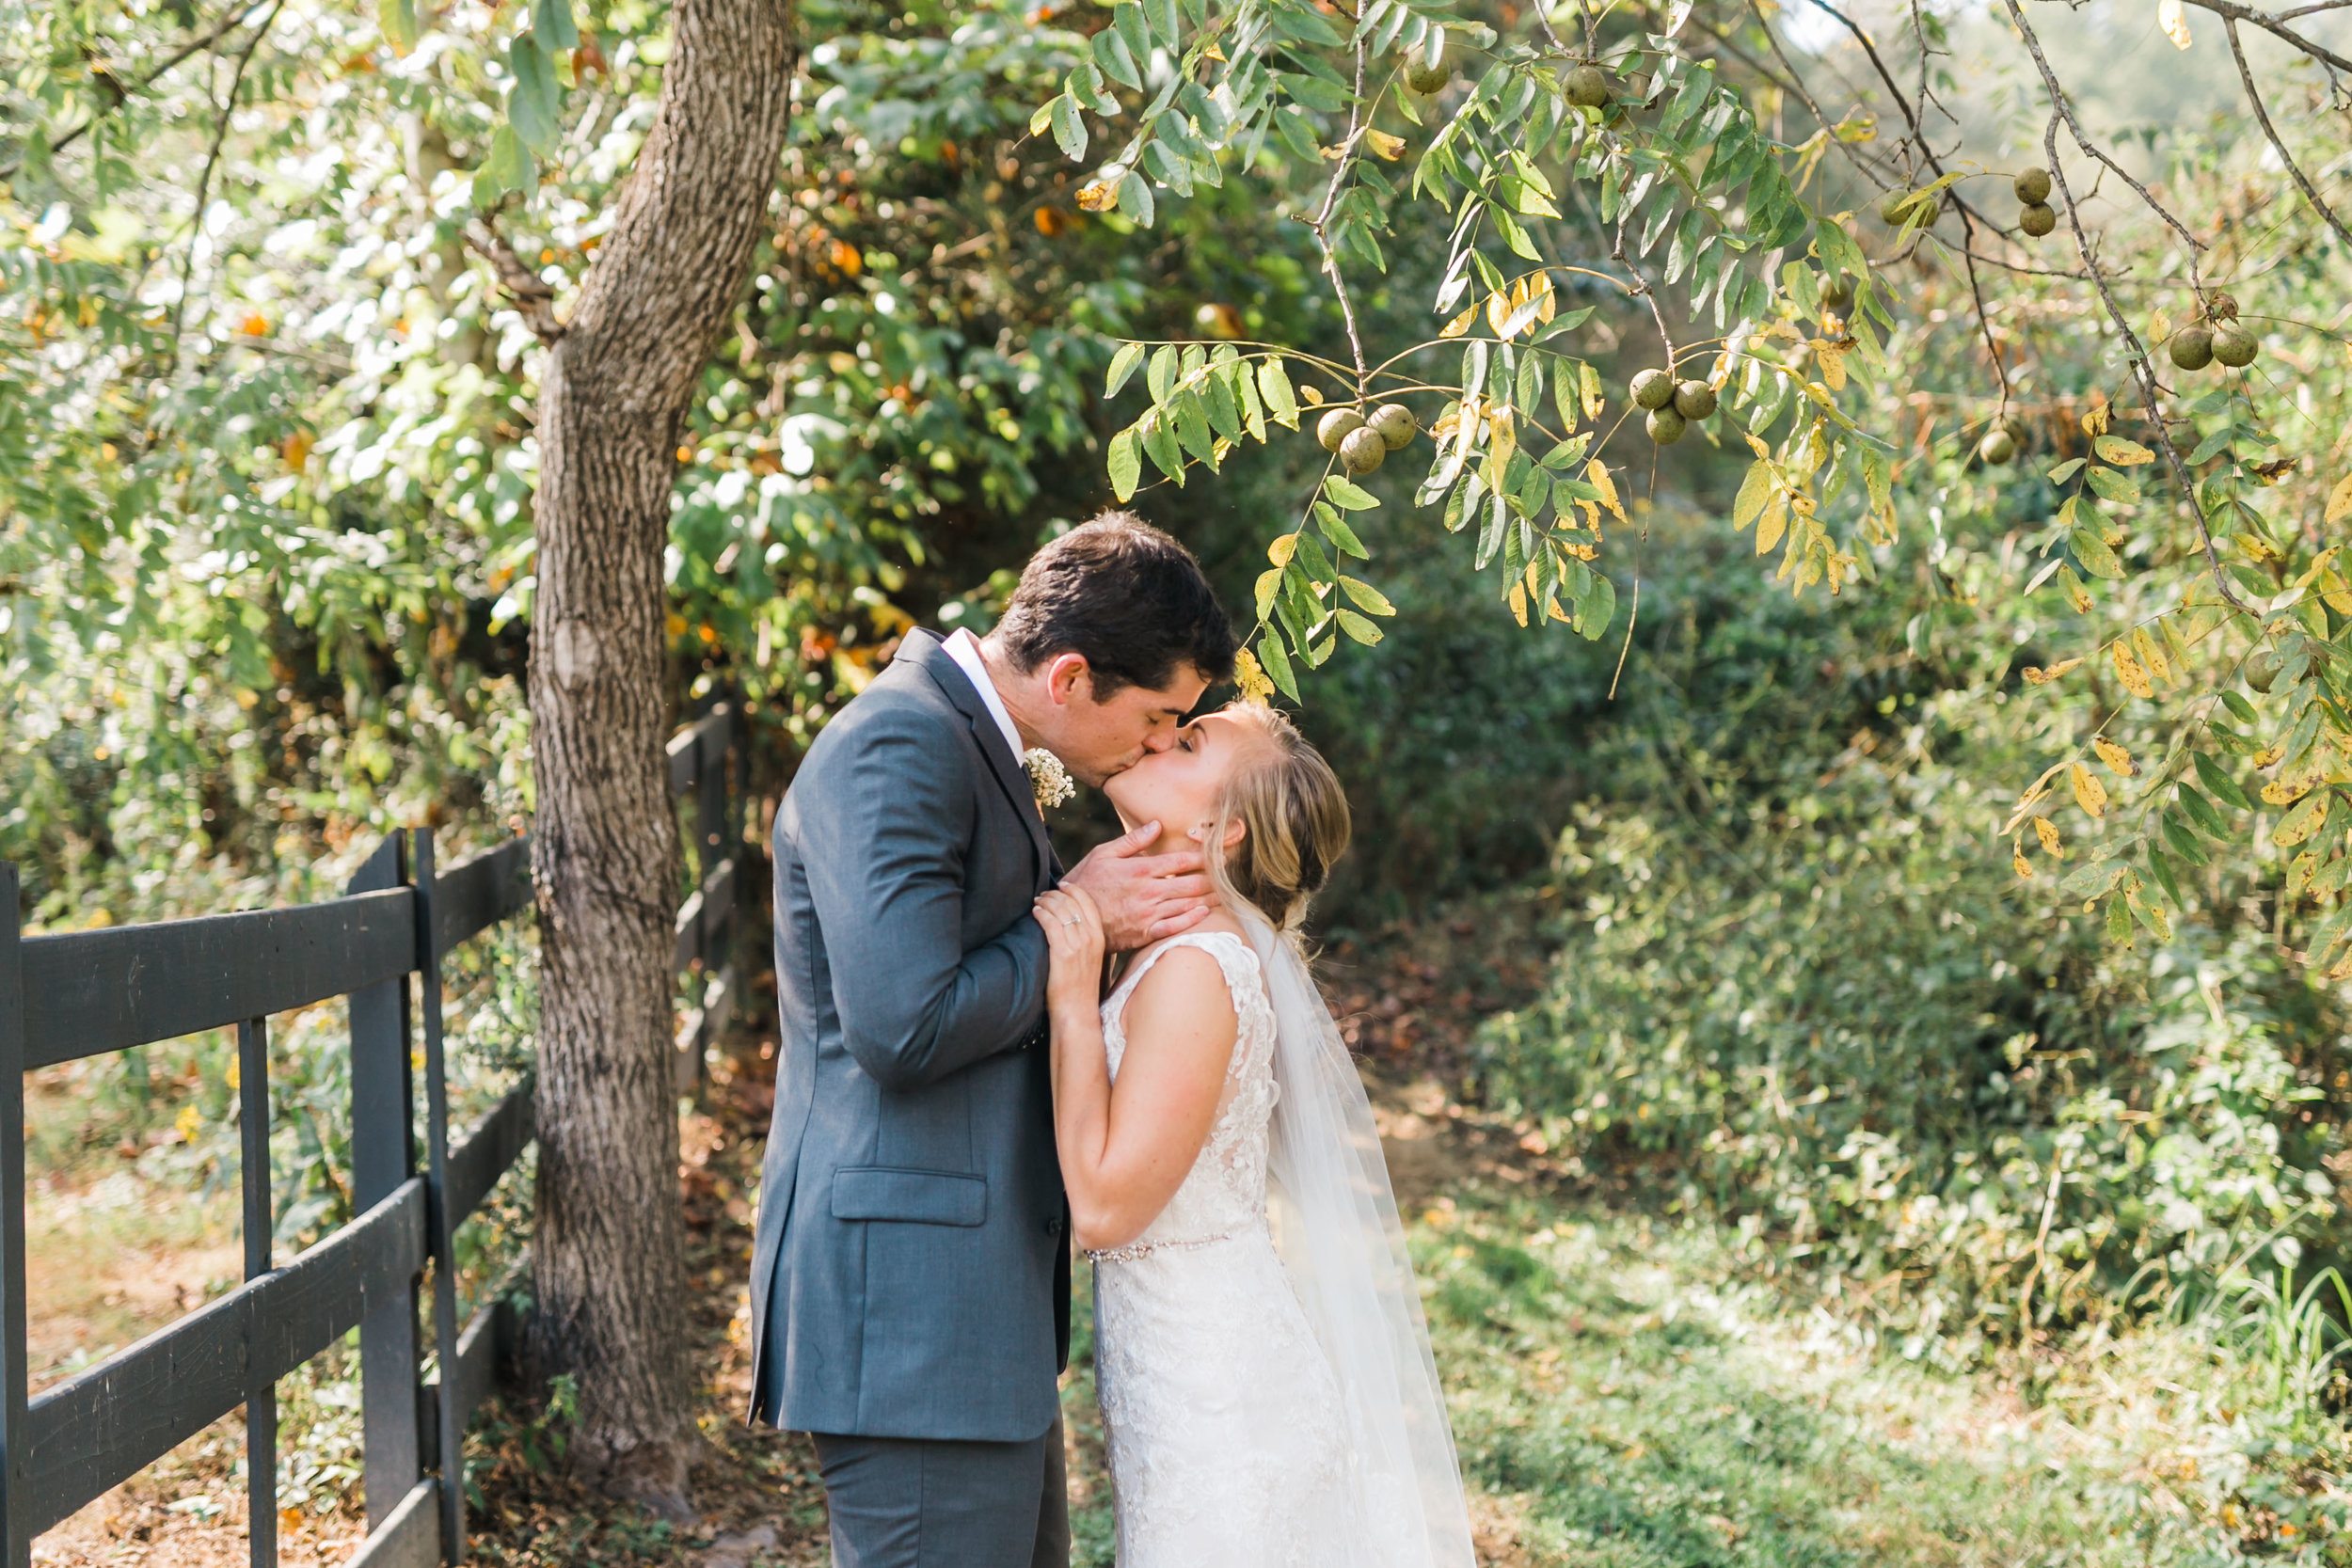 A Classic Country Wedding at 4 Points Farm